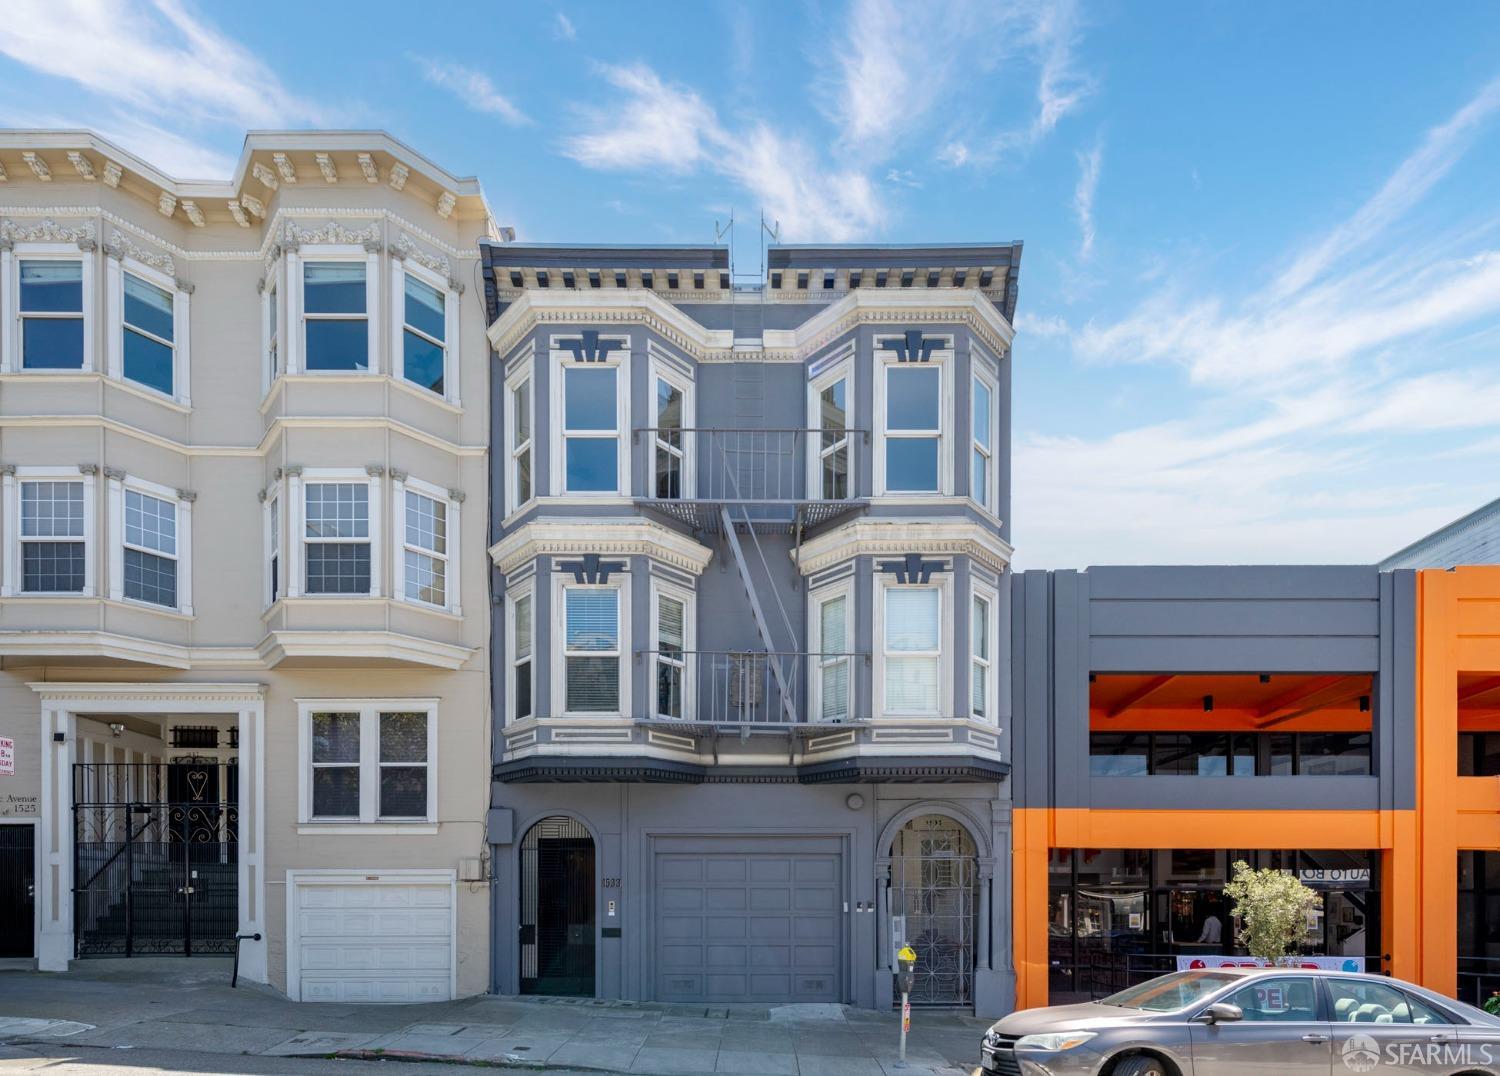 Photo of 1537 Pacific Ave in San Francisco, CA